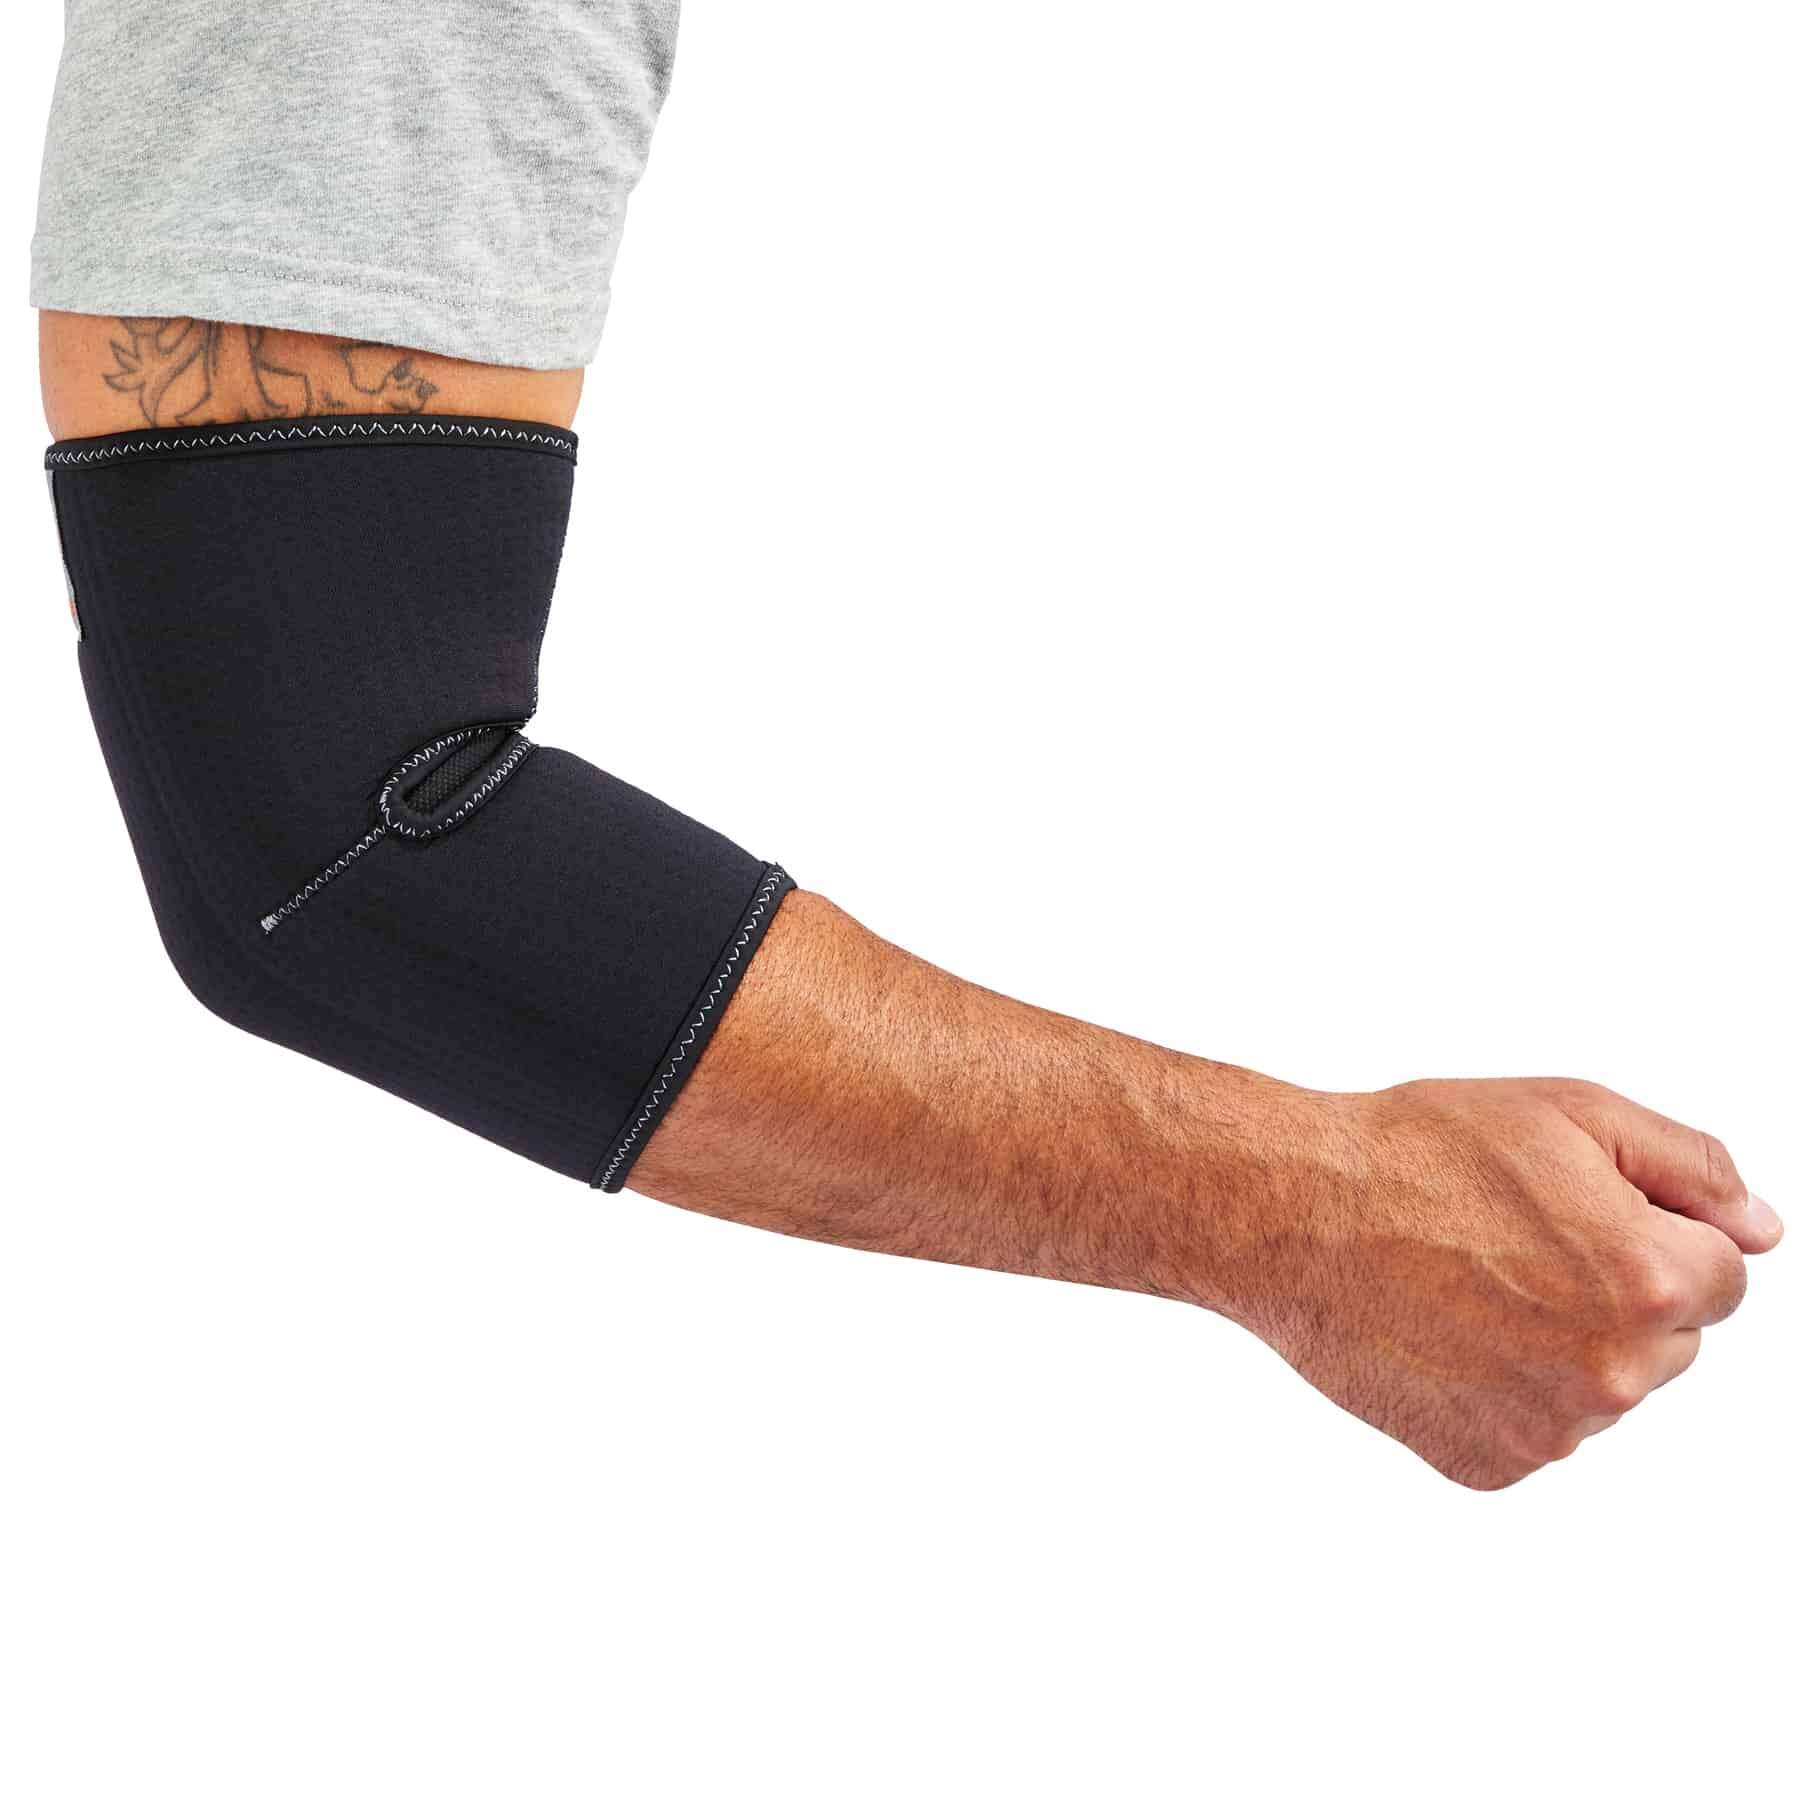 Neoprene Compression Elbow Sleeve Supports